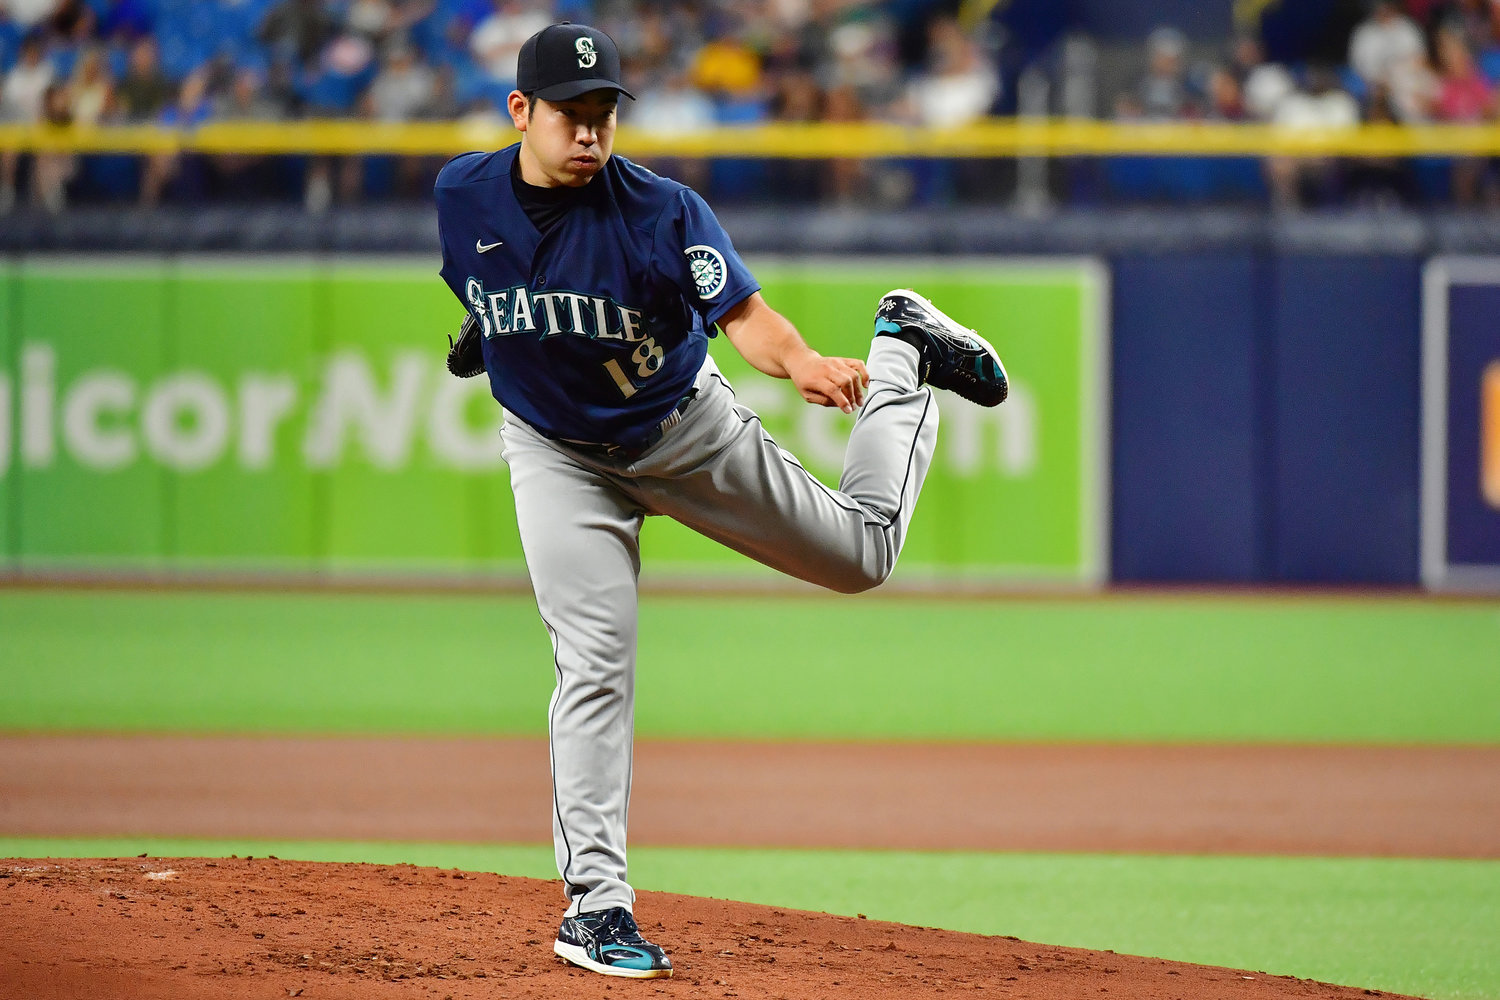 Seattle Mariners pitcher Yusei Kikuchi works against the Tampa Bay Rays in the first inning at Tropicana Field on Tuesday, Aug. 3, 2021, in St. Petersburg, Florida.